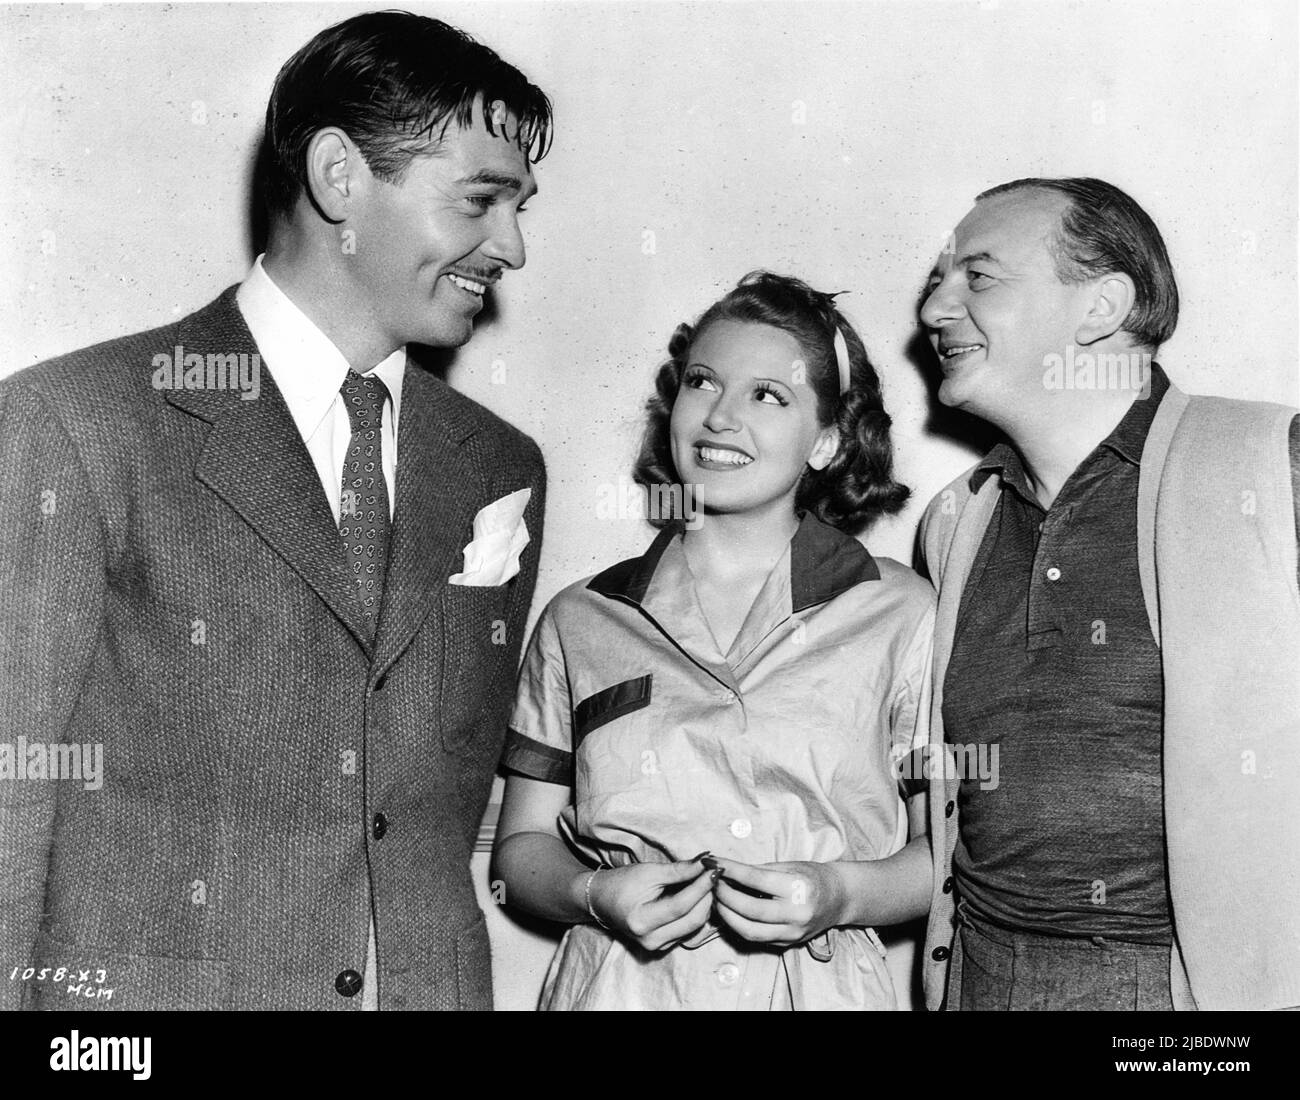 Set Visitor CLARK GABLE with a young LANA TURNER and Director REINHOLD SCHUNZEL on set candid at the start of filming in June 1938 of RICH MAN, POOR GIRL 1938 director REINHOLD SCHUNZEL from play White Collars by Edith Ellis Metro Goldwyn Mayer Stock Photo